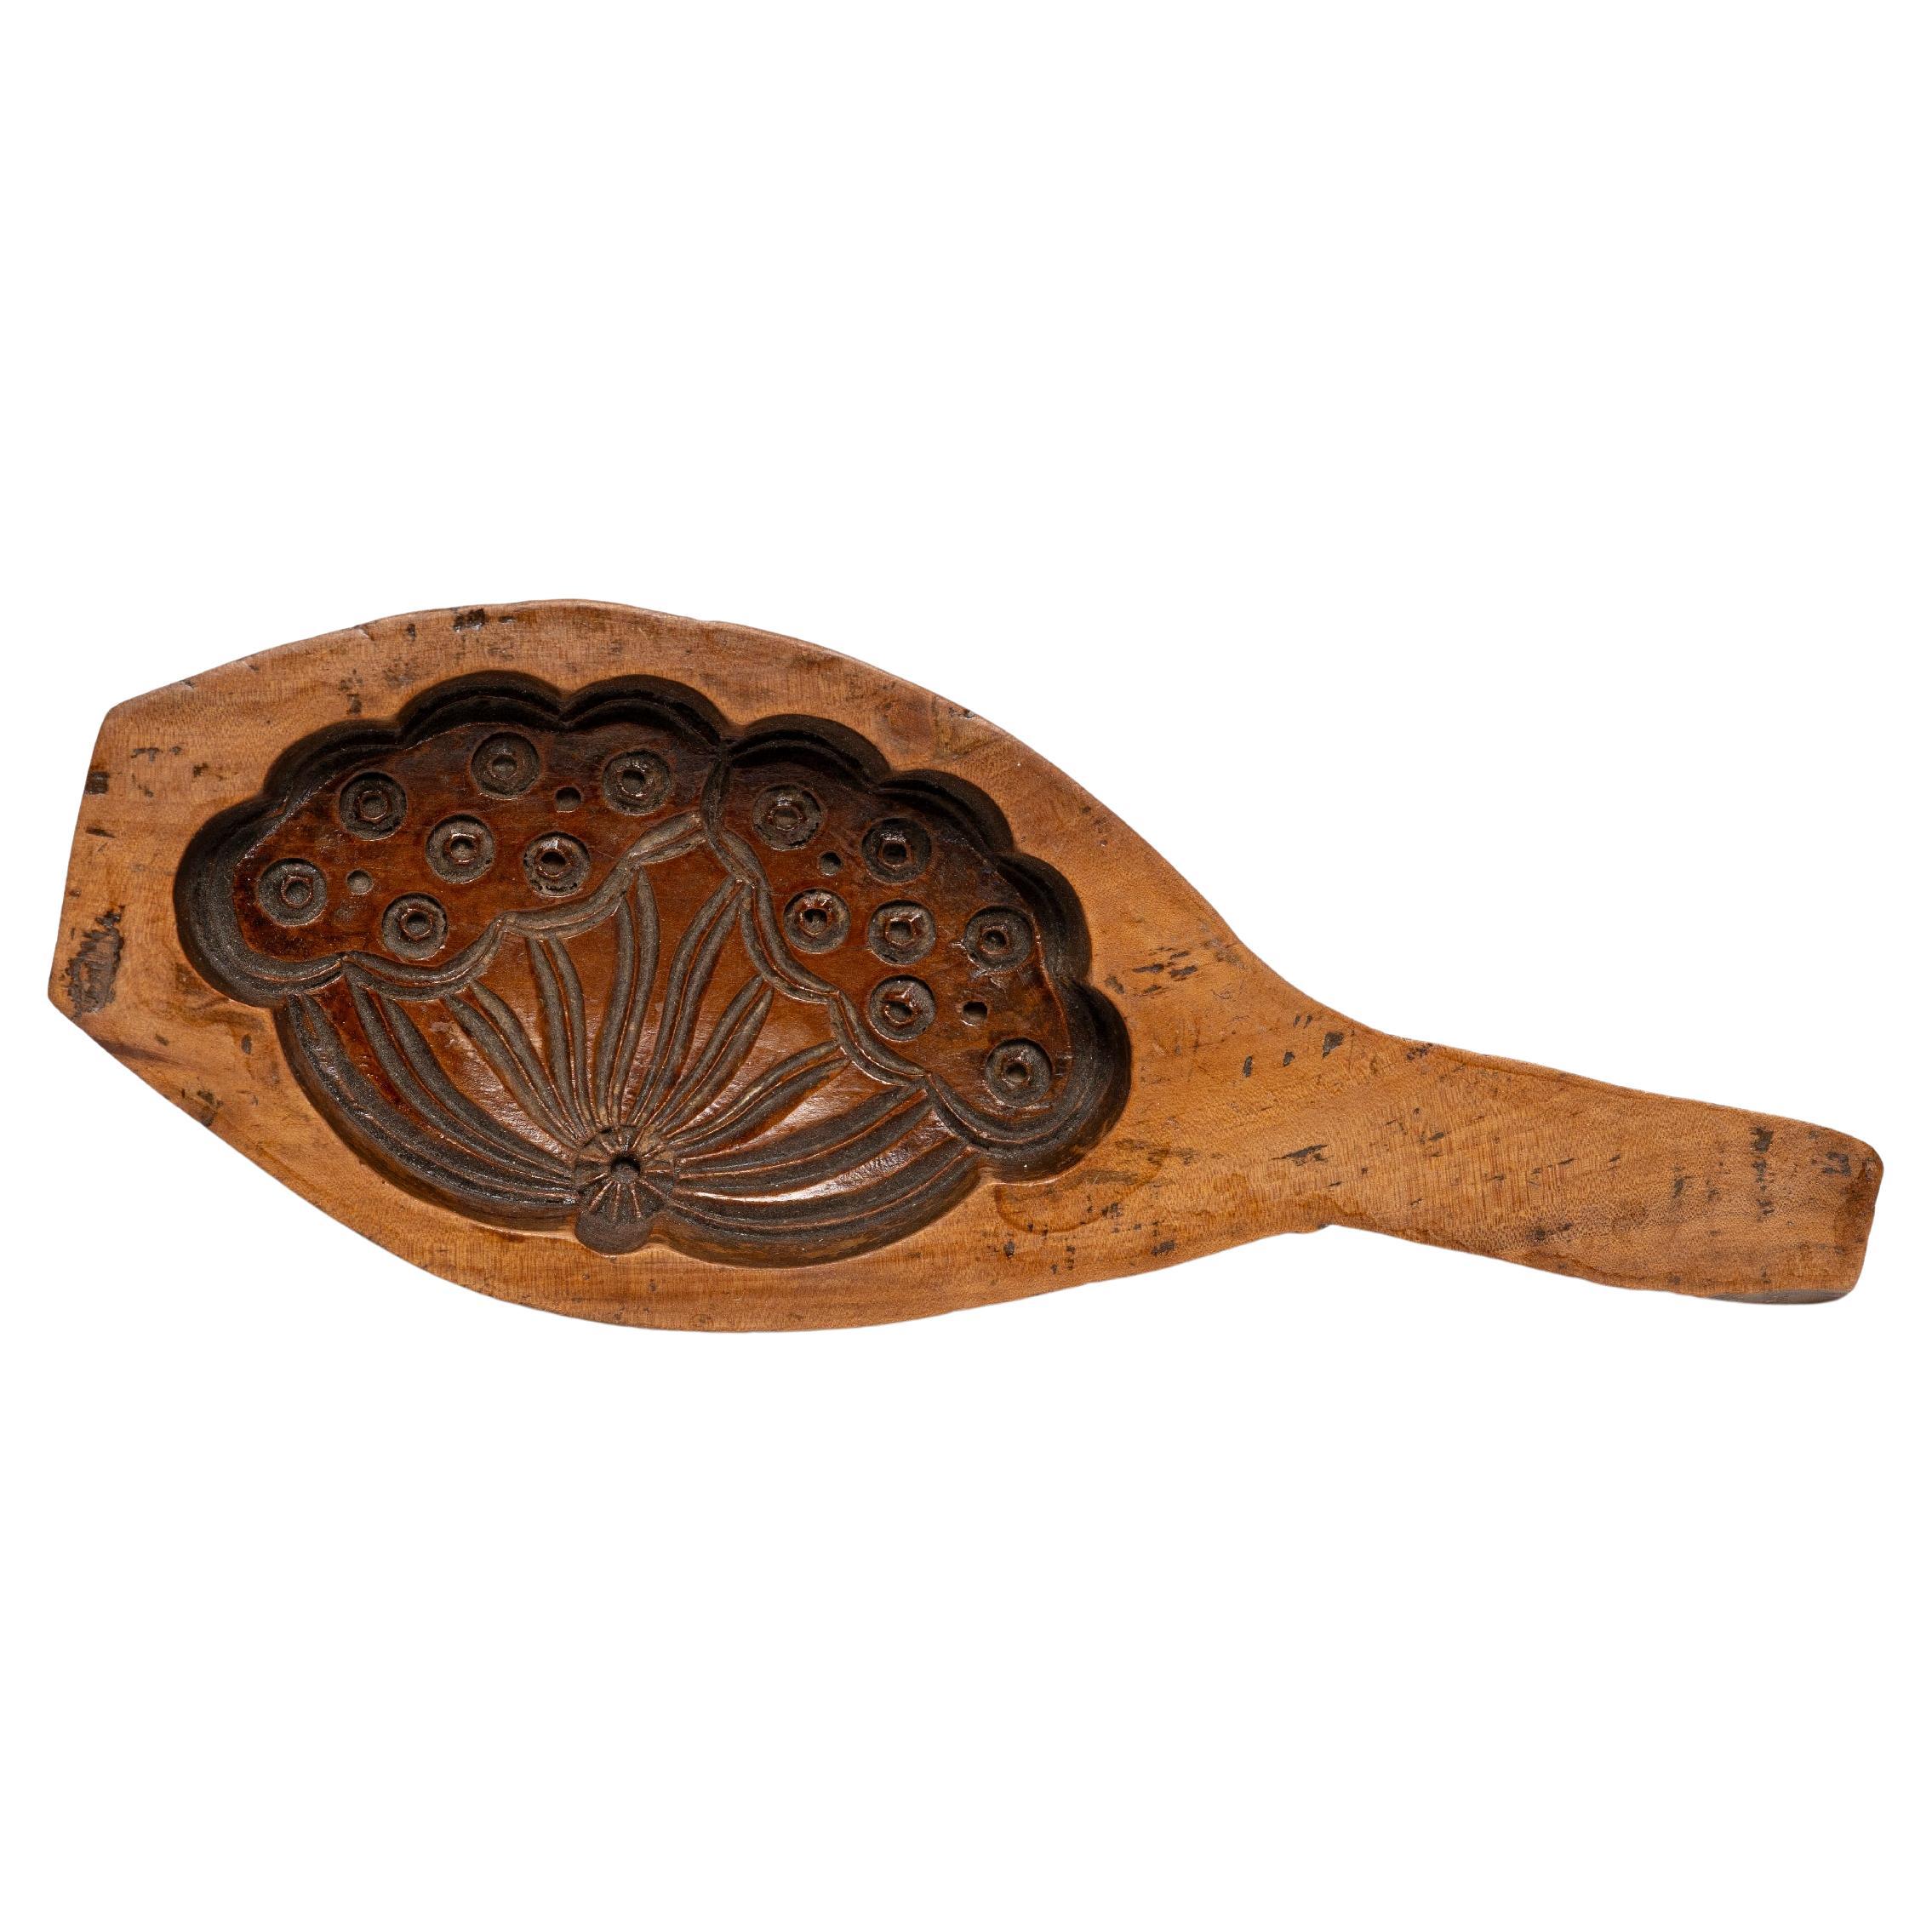 Handheld Chinese Mooncake Mold with Lotus Pods, c. 1900